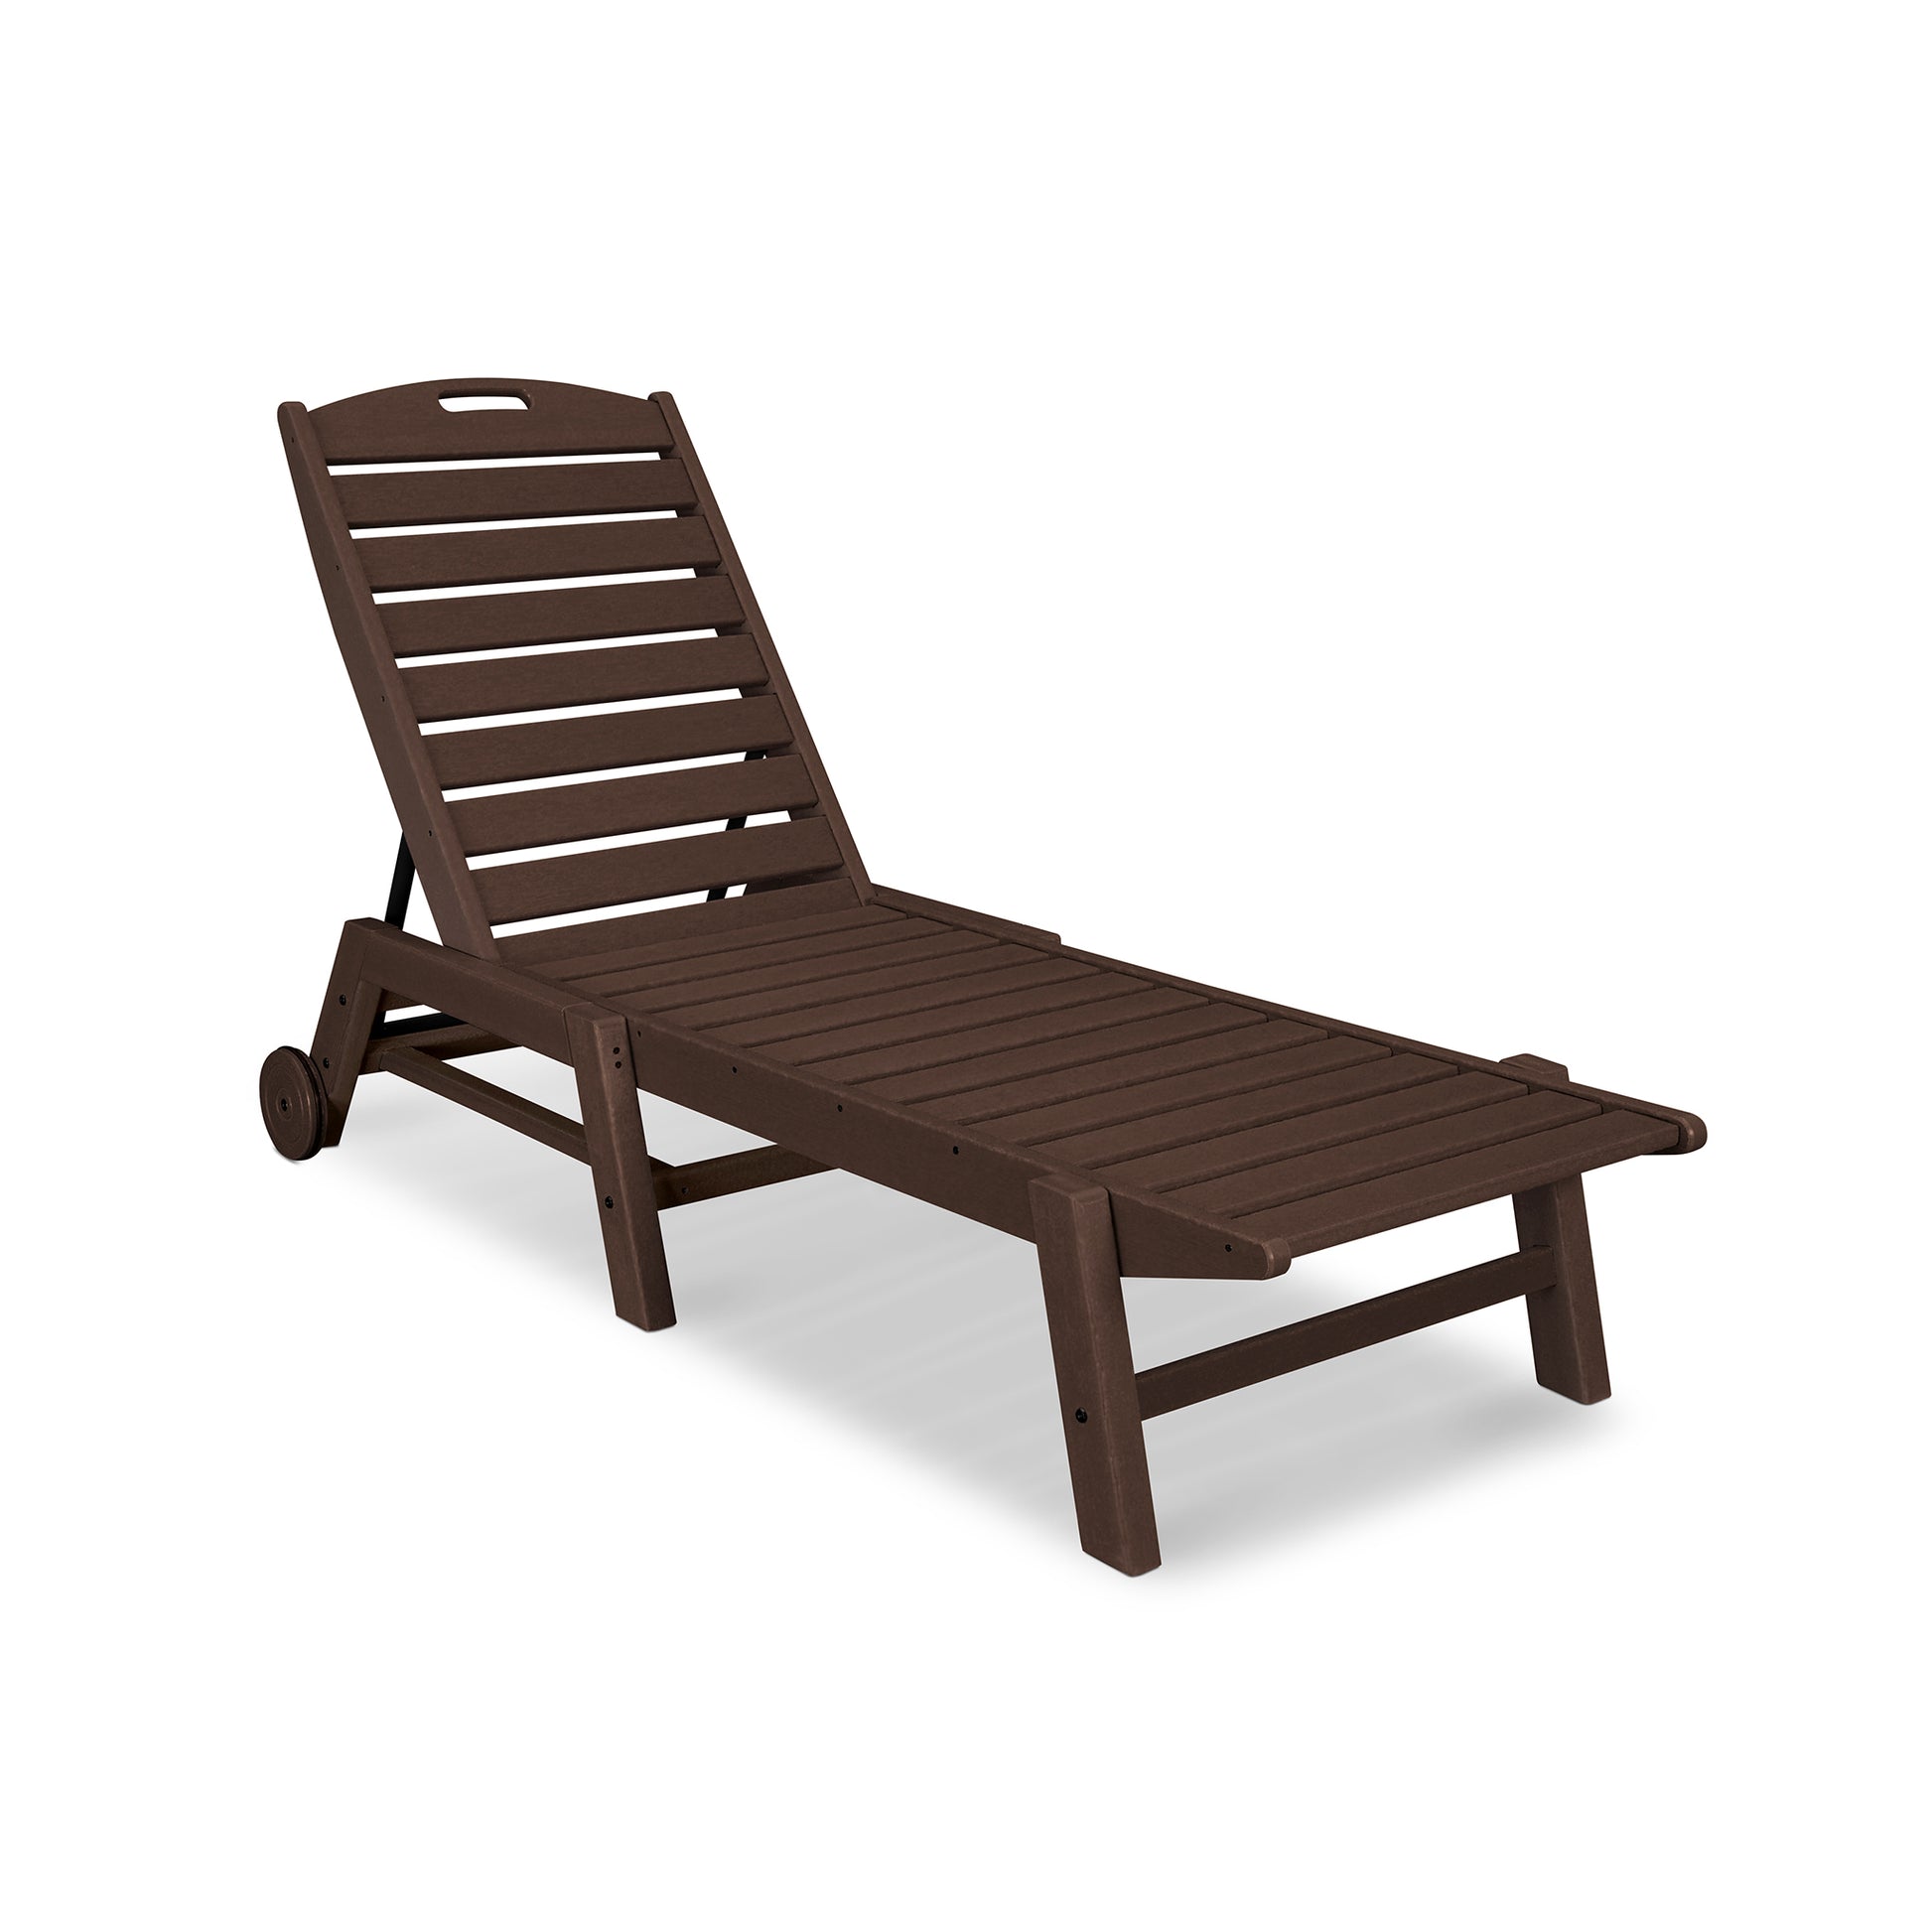 A brown POLYWOOD Nautical Wheeled Chaise - Stackable lounge chair with adjustable backrest and wheels, isolated on a white background.